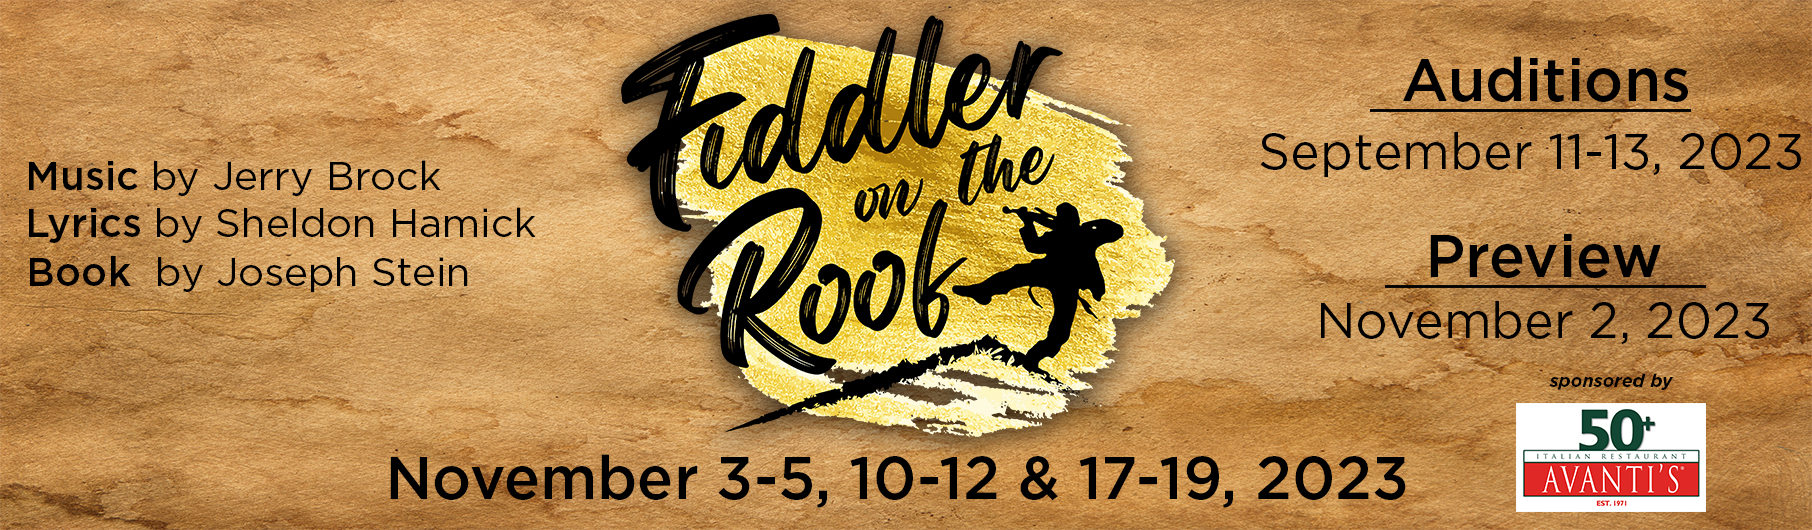 Community Players Theatre Presents: Fiddler on the Roof Preview/Pay What You Can Night